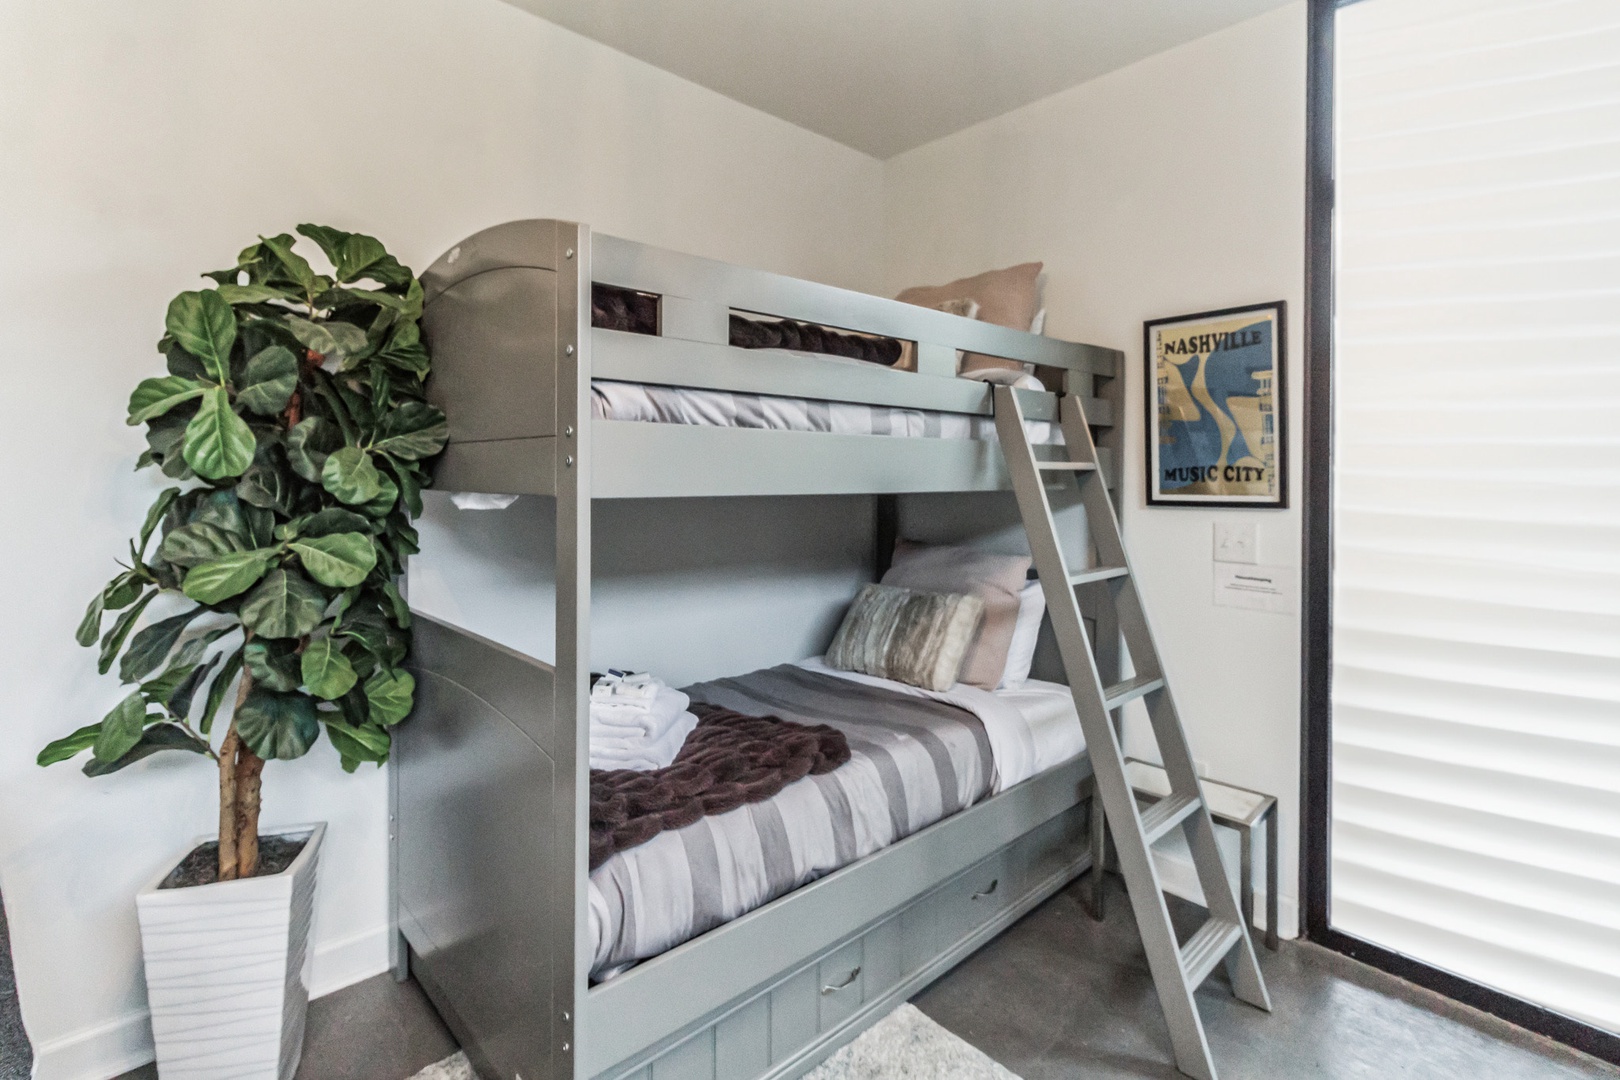 Unit C2: The chic first floor common area offers a twin-over-twin bunkbed